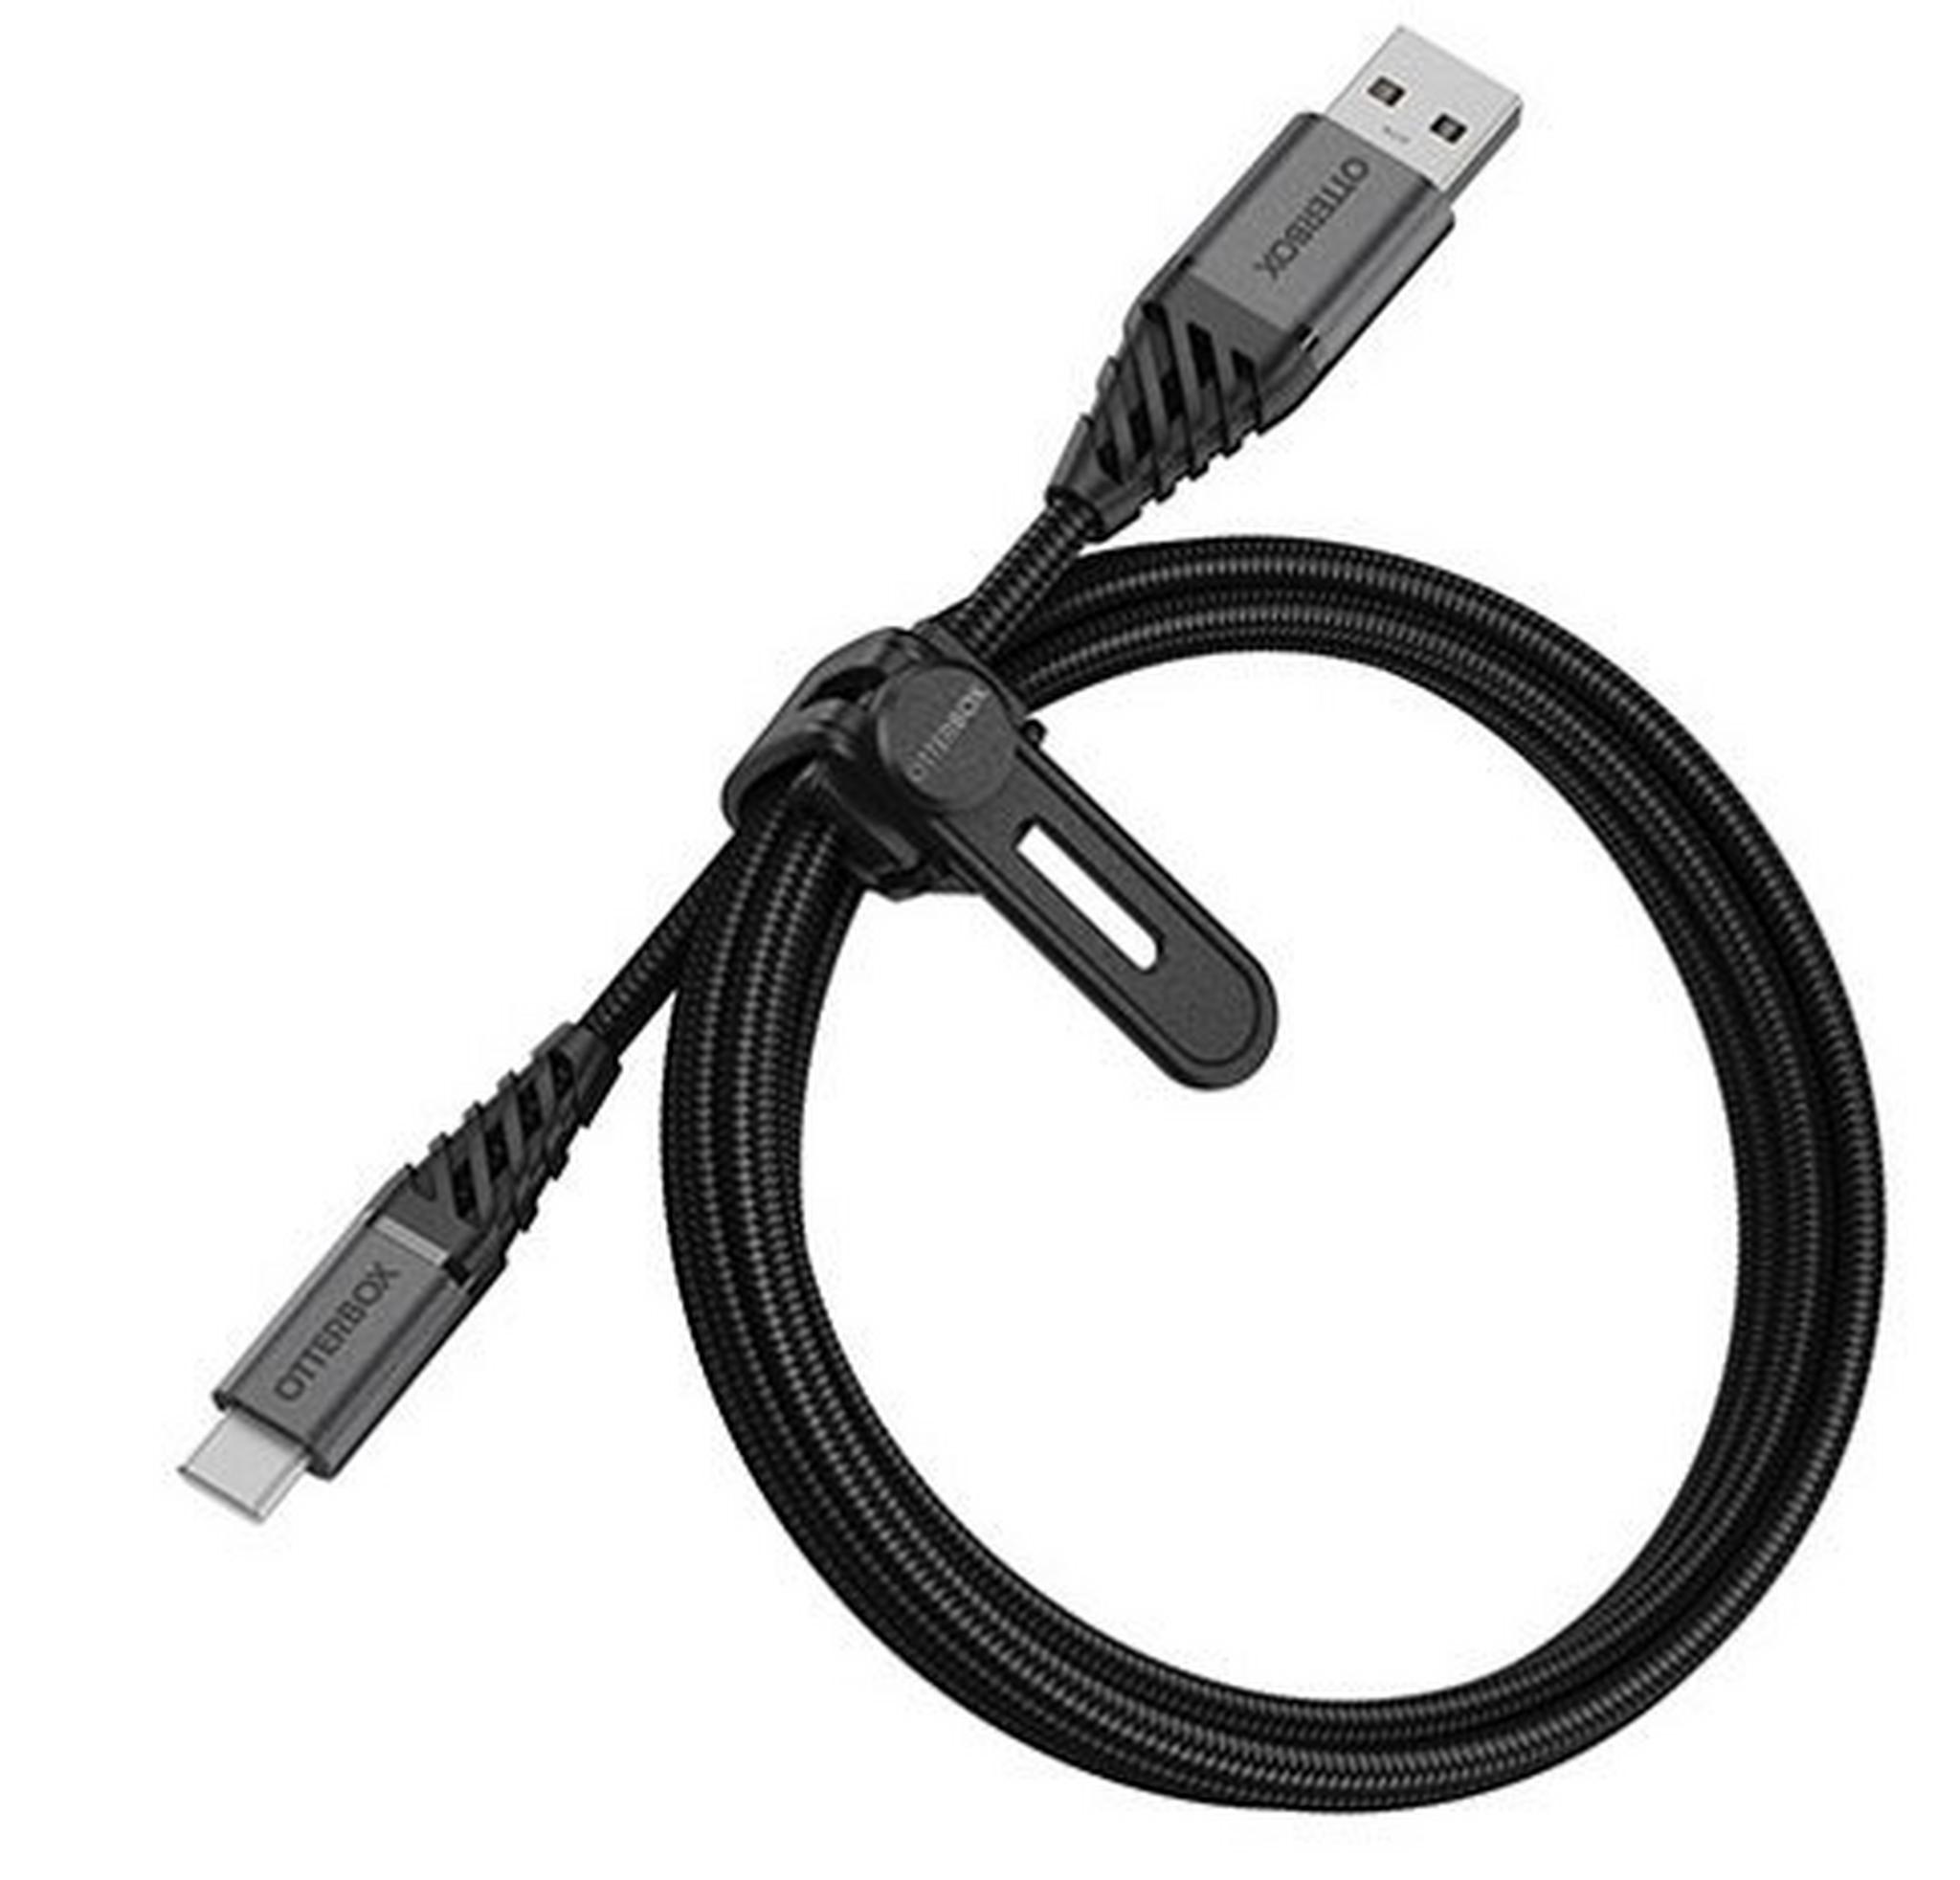 OtterBox Premium USB-A to USB-C Cable 1-Meter (78-52664) - Black